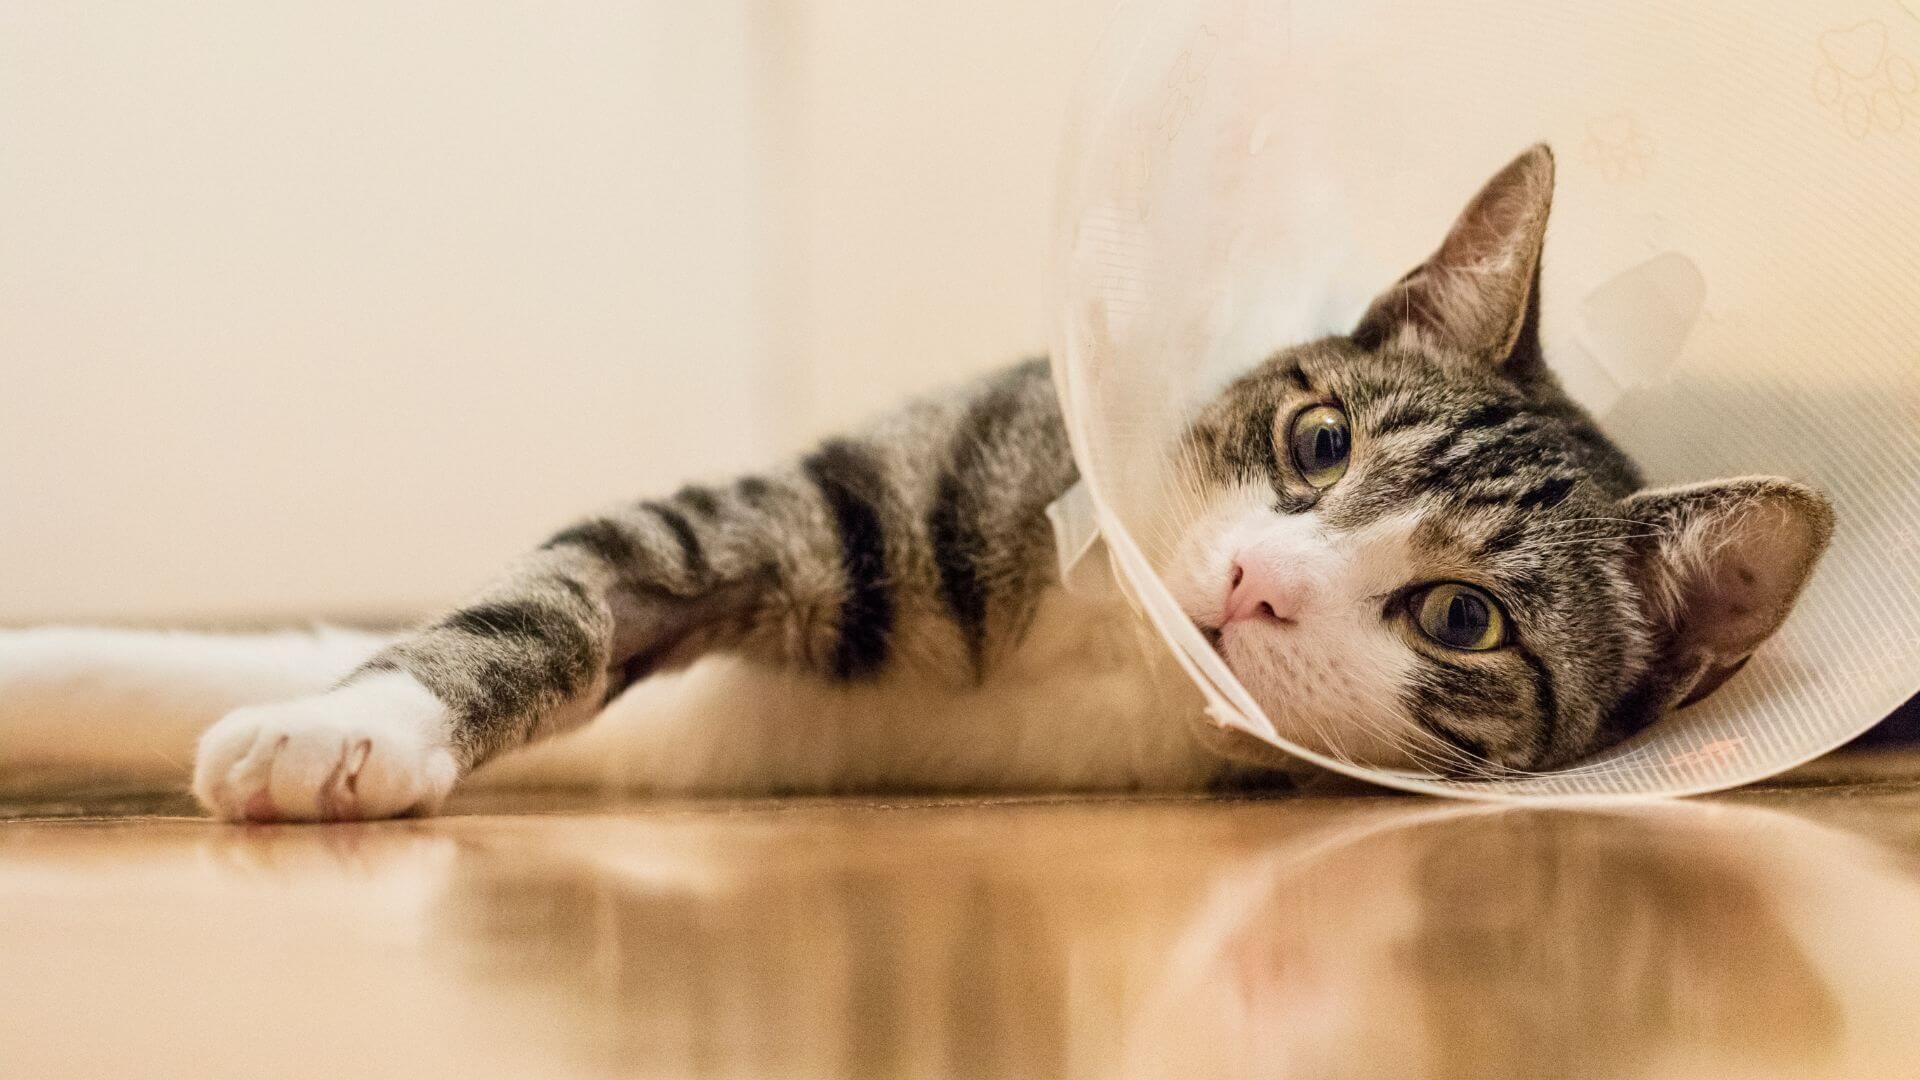 A cat lying on the floor with a cone on its head